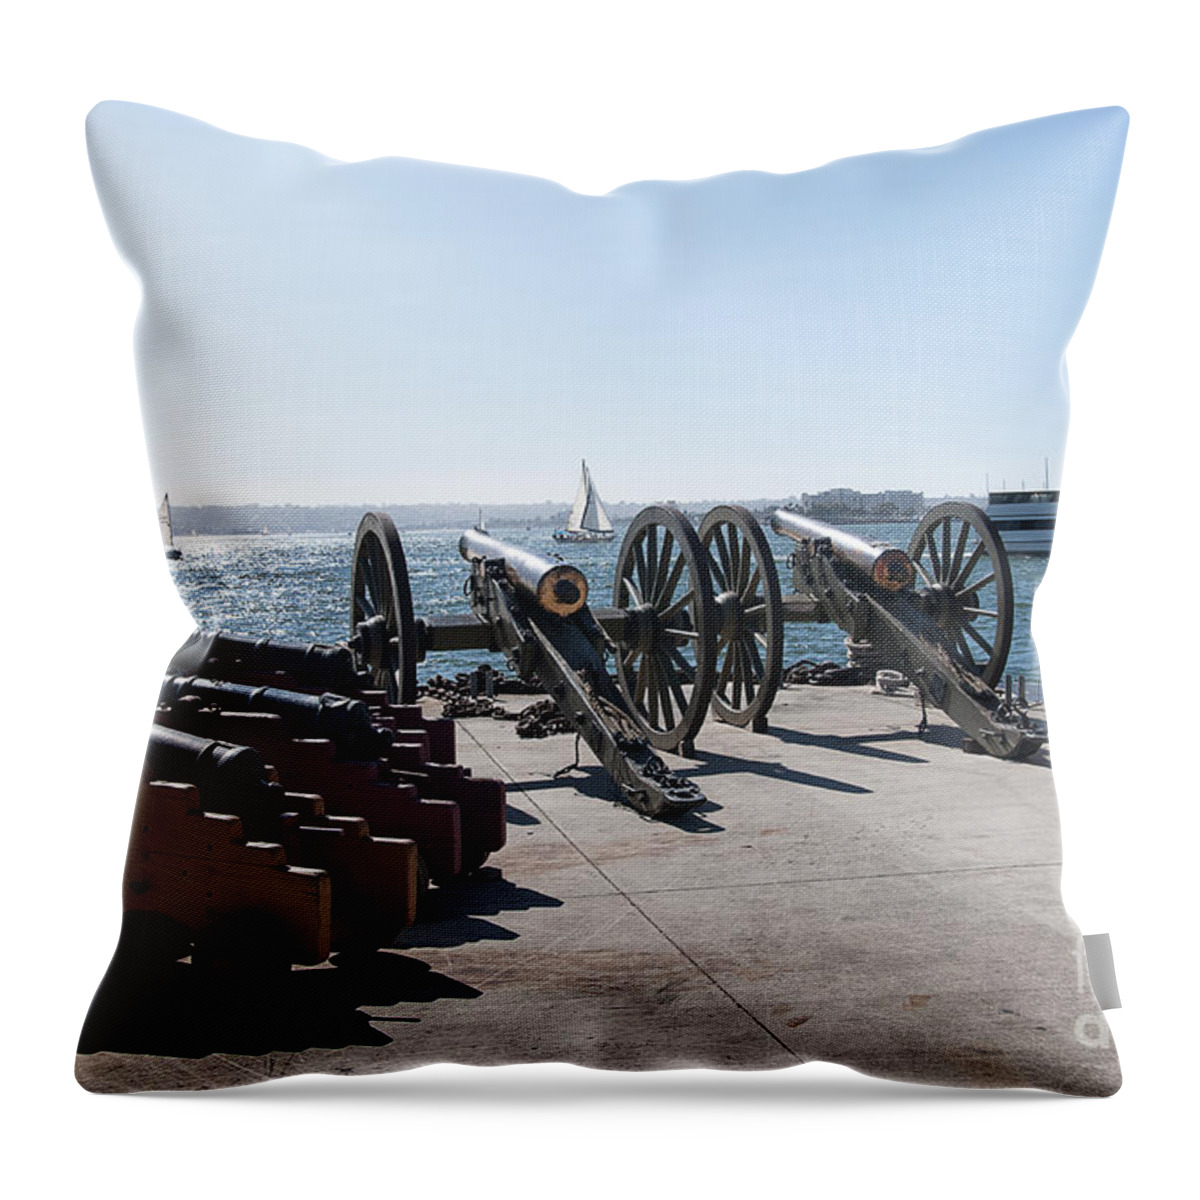 San Diego Throw Pillow featuring the photograph Cannonade by Brenda Kean